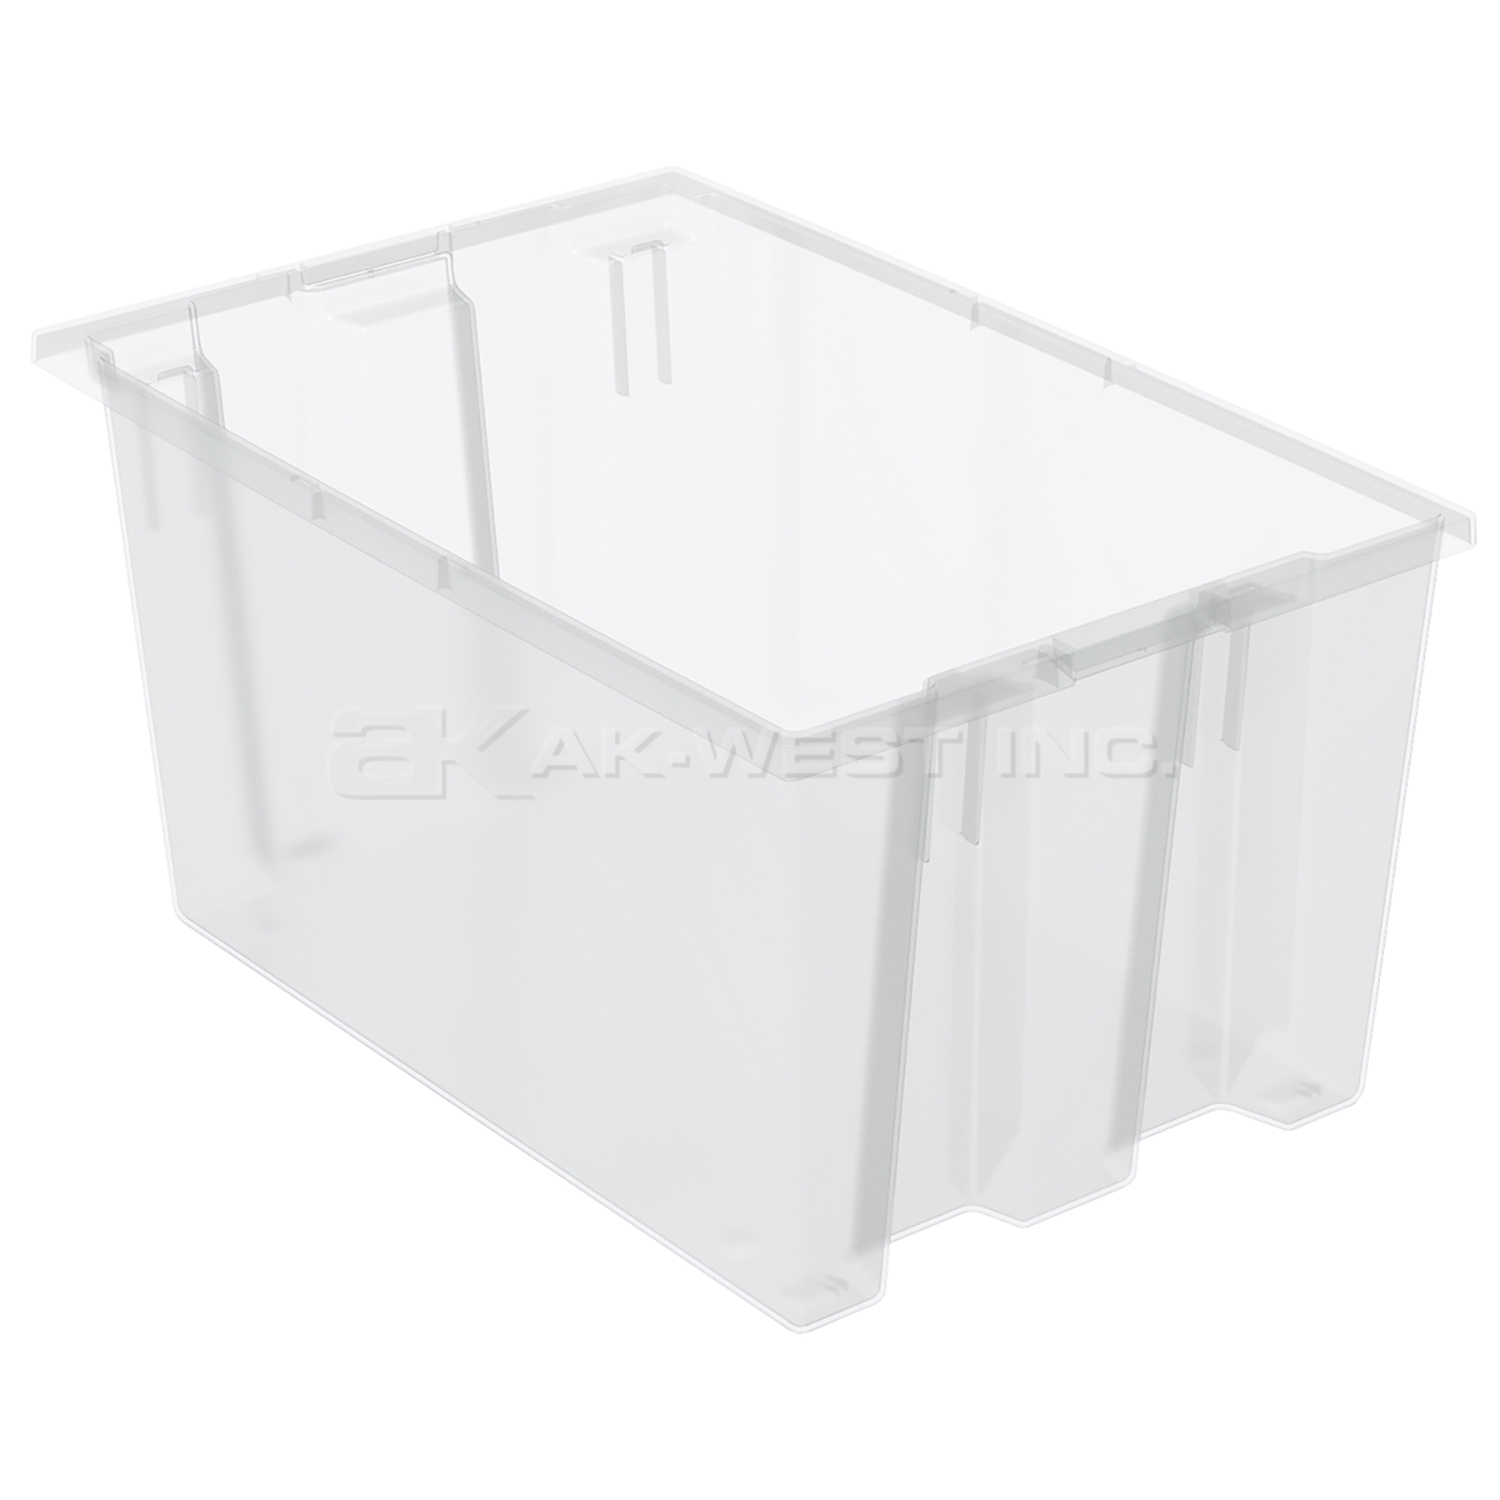 Clear, 23-1/2" x 15-1/2" x 12" Nest and Stack Tote (3 Per Carton)